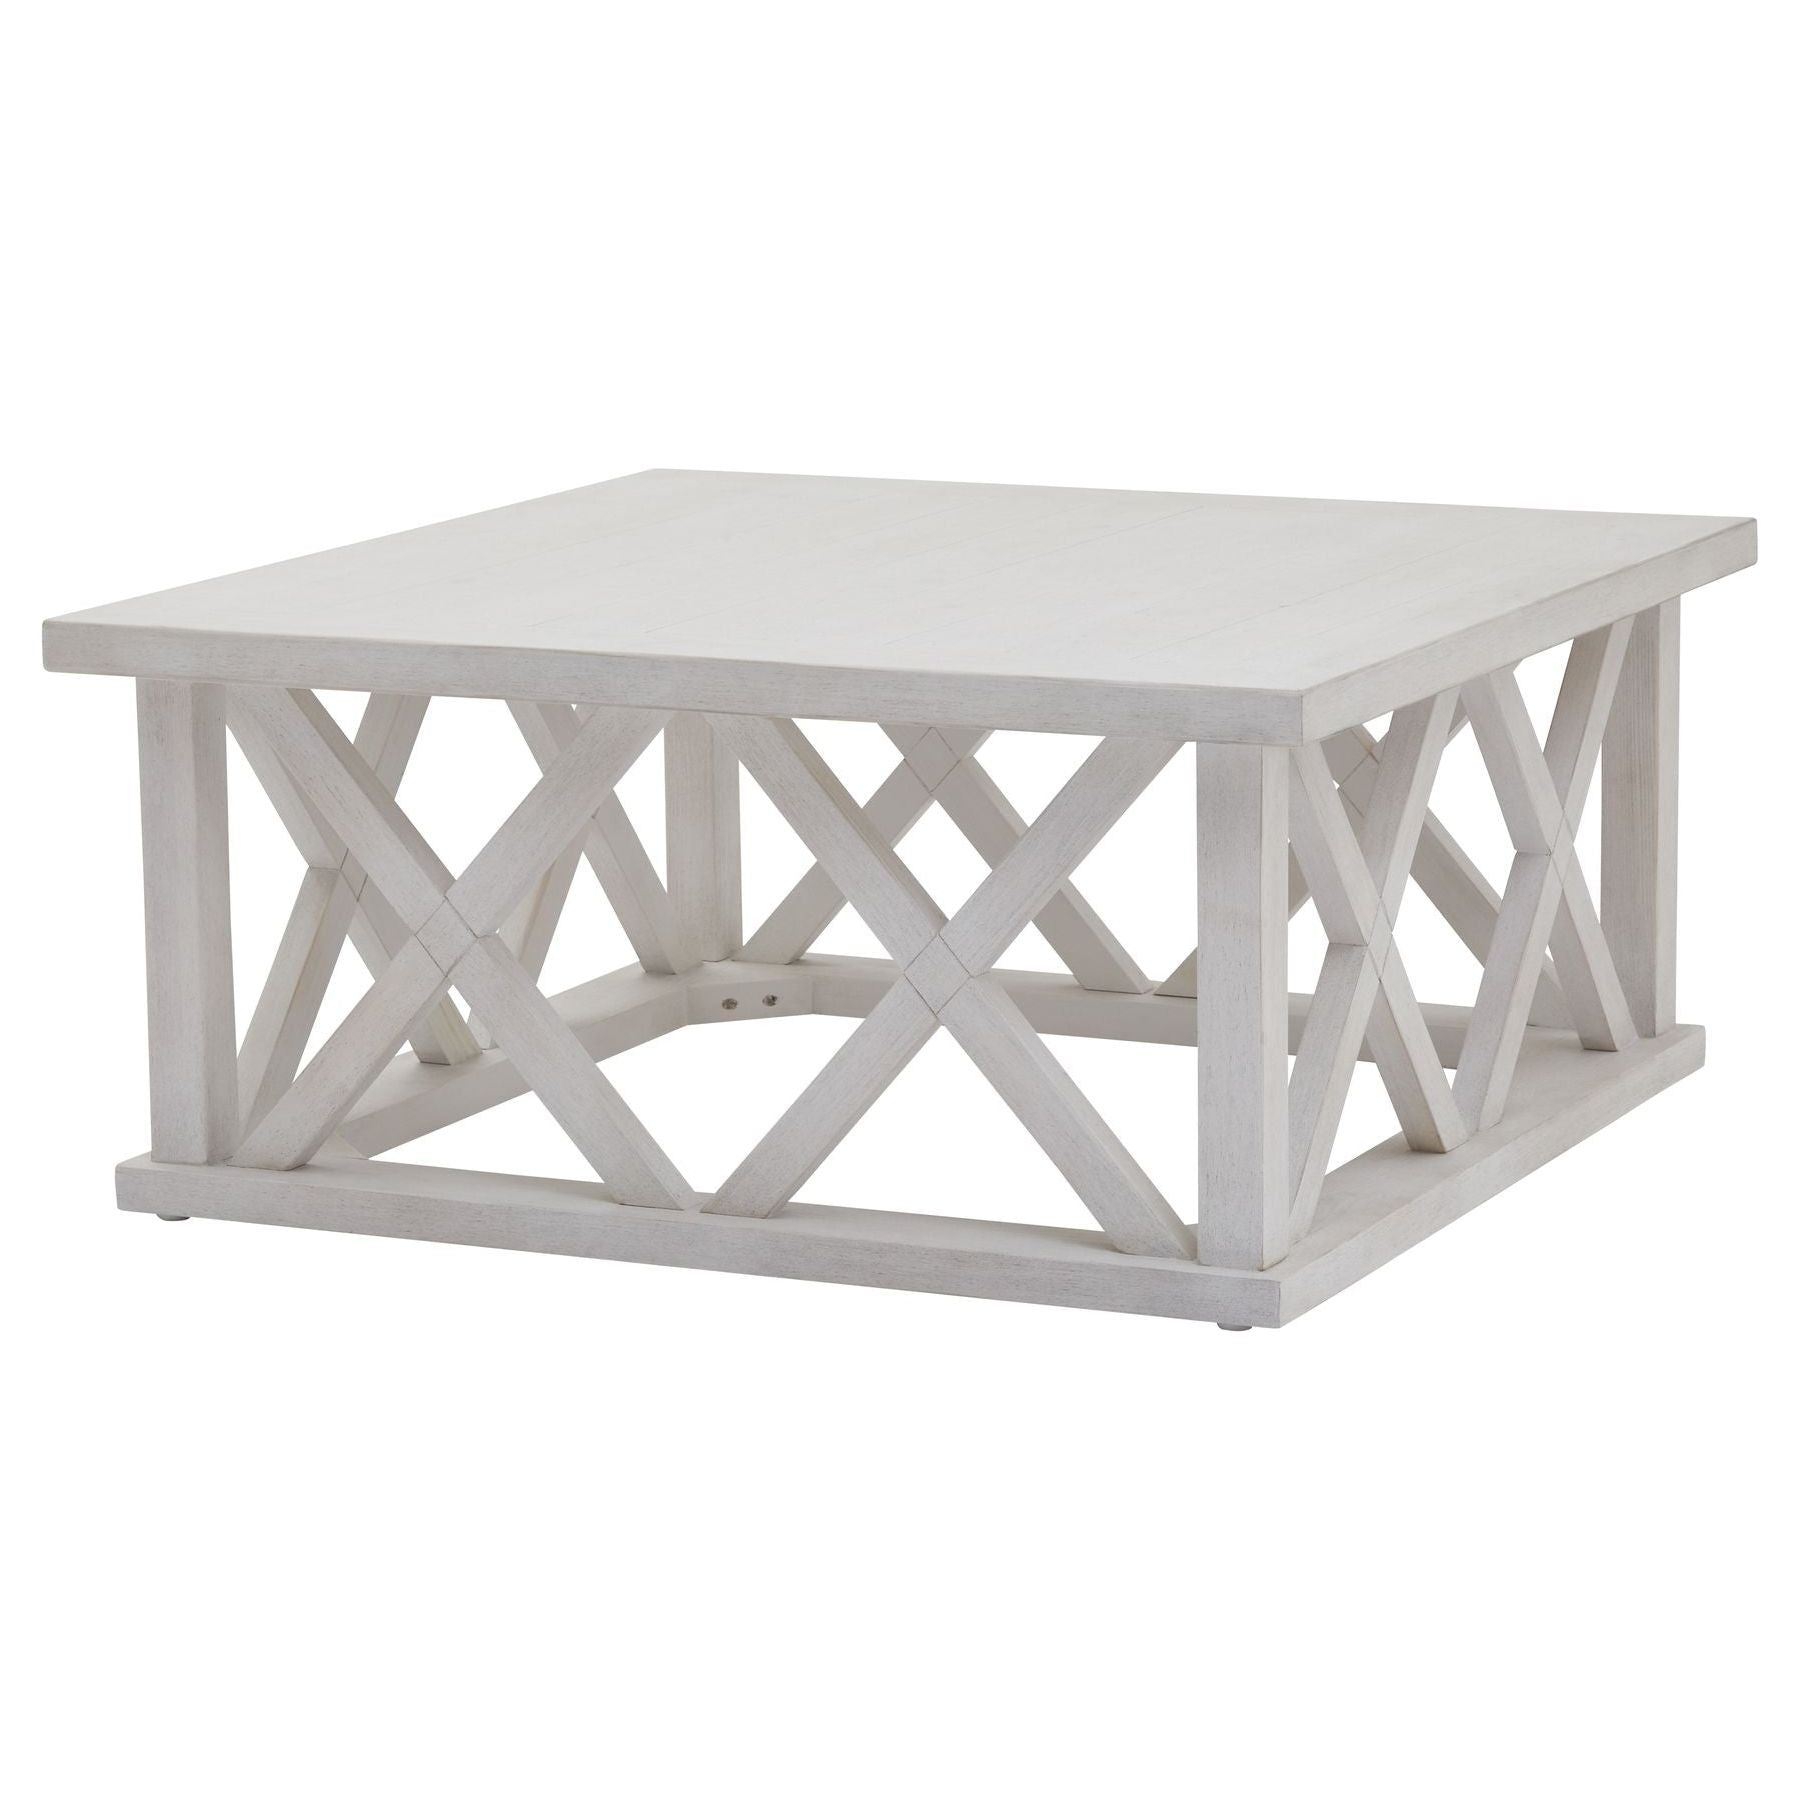 Stamford Plank Collection Square Coffee Table - Ashton and Finch